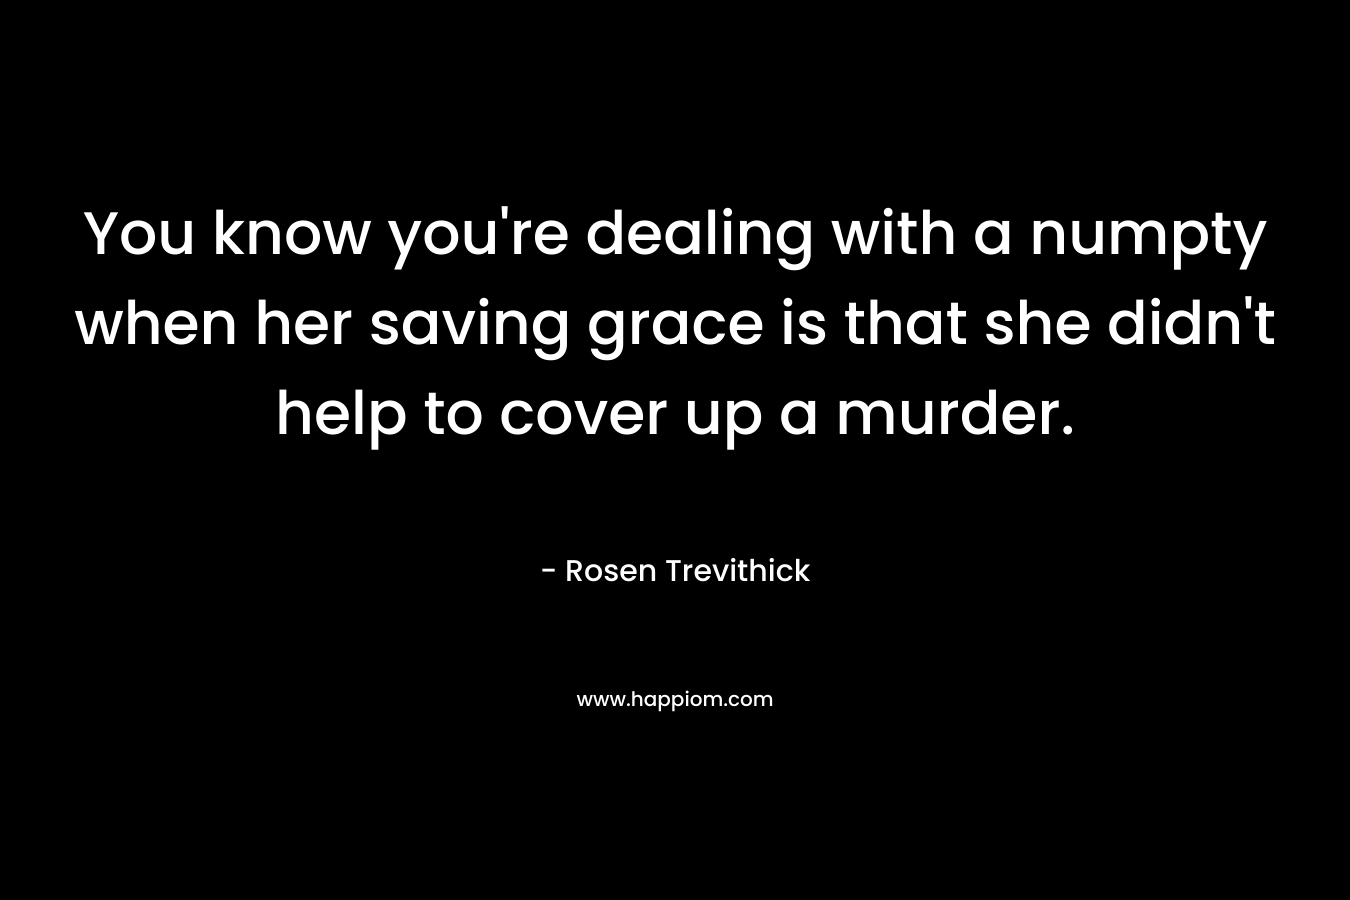 You know you’re dealing with a numpty when her saving grace is that she didn’t help to cover up a murder. – Rosen Trevithick